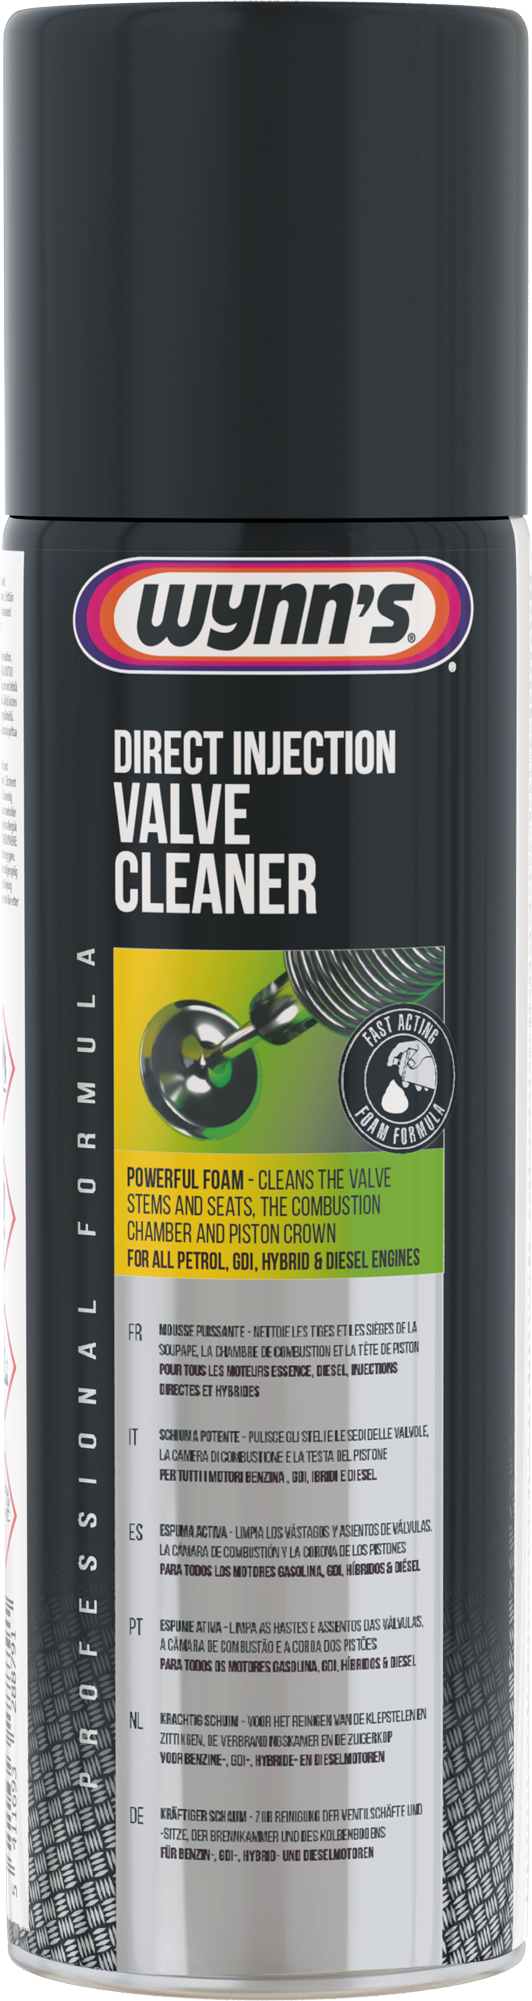 Direct Injection Valve Cleaner